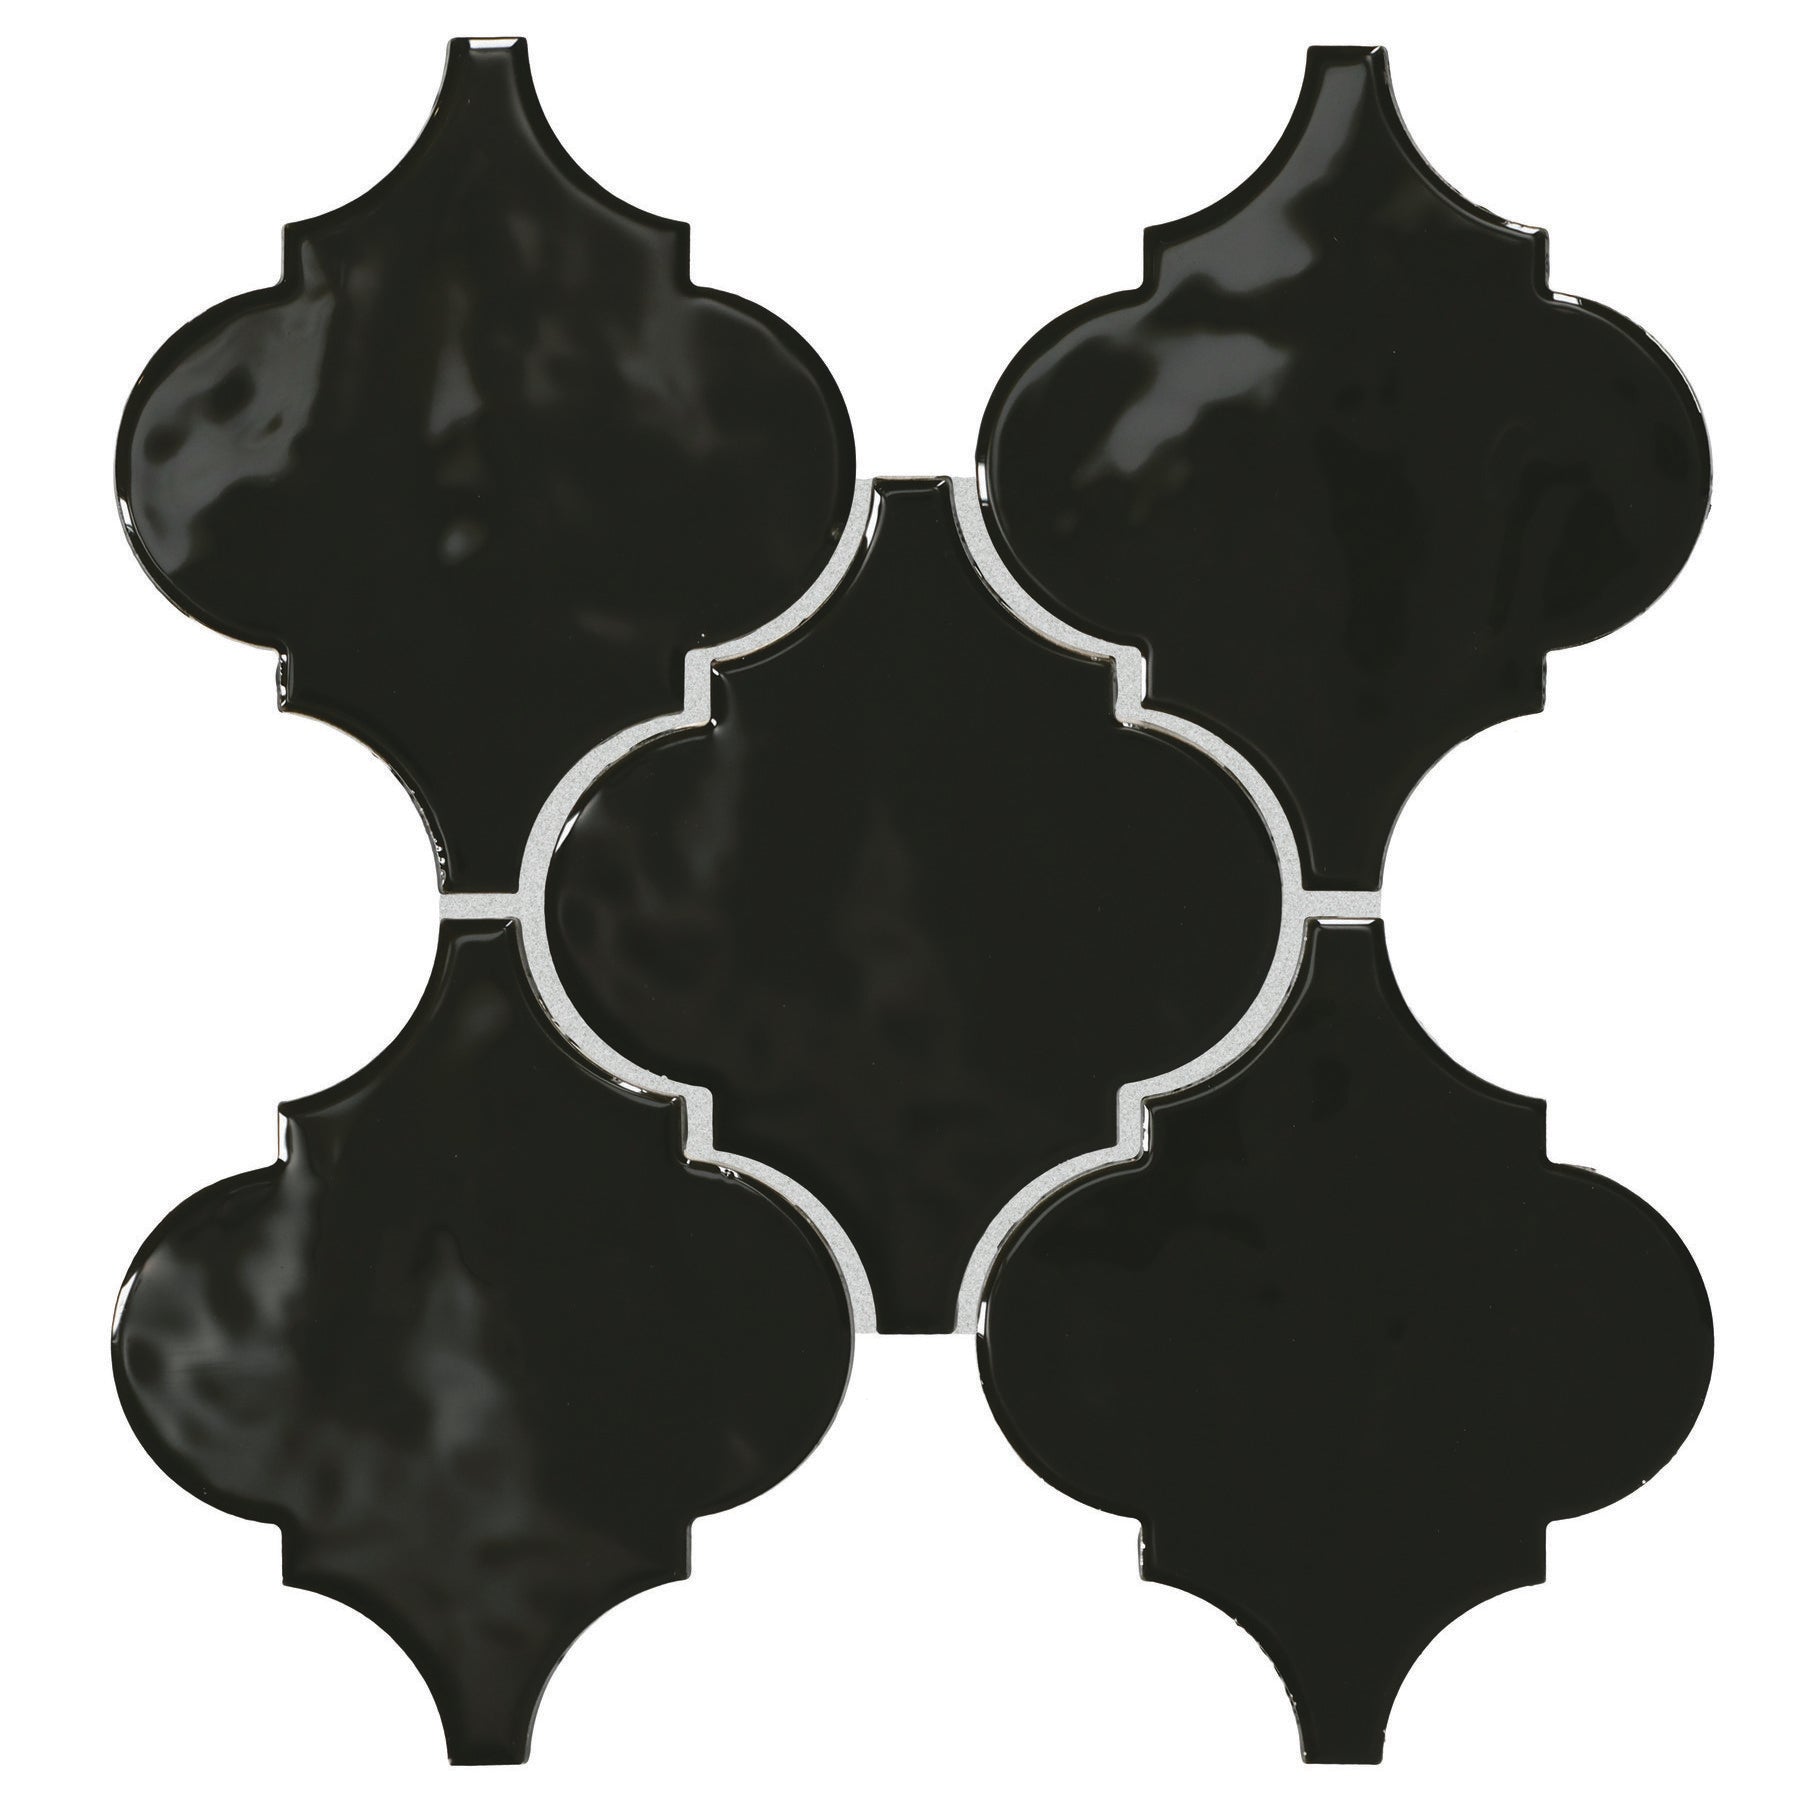 American Olean - Playscapes Arabesque Wall Tile - Pitch Black PS71